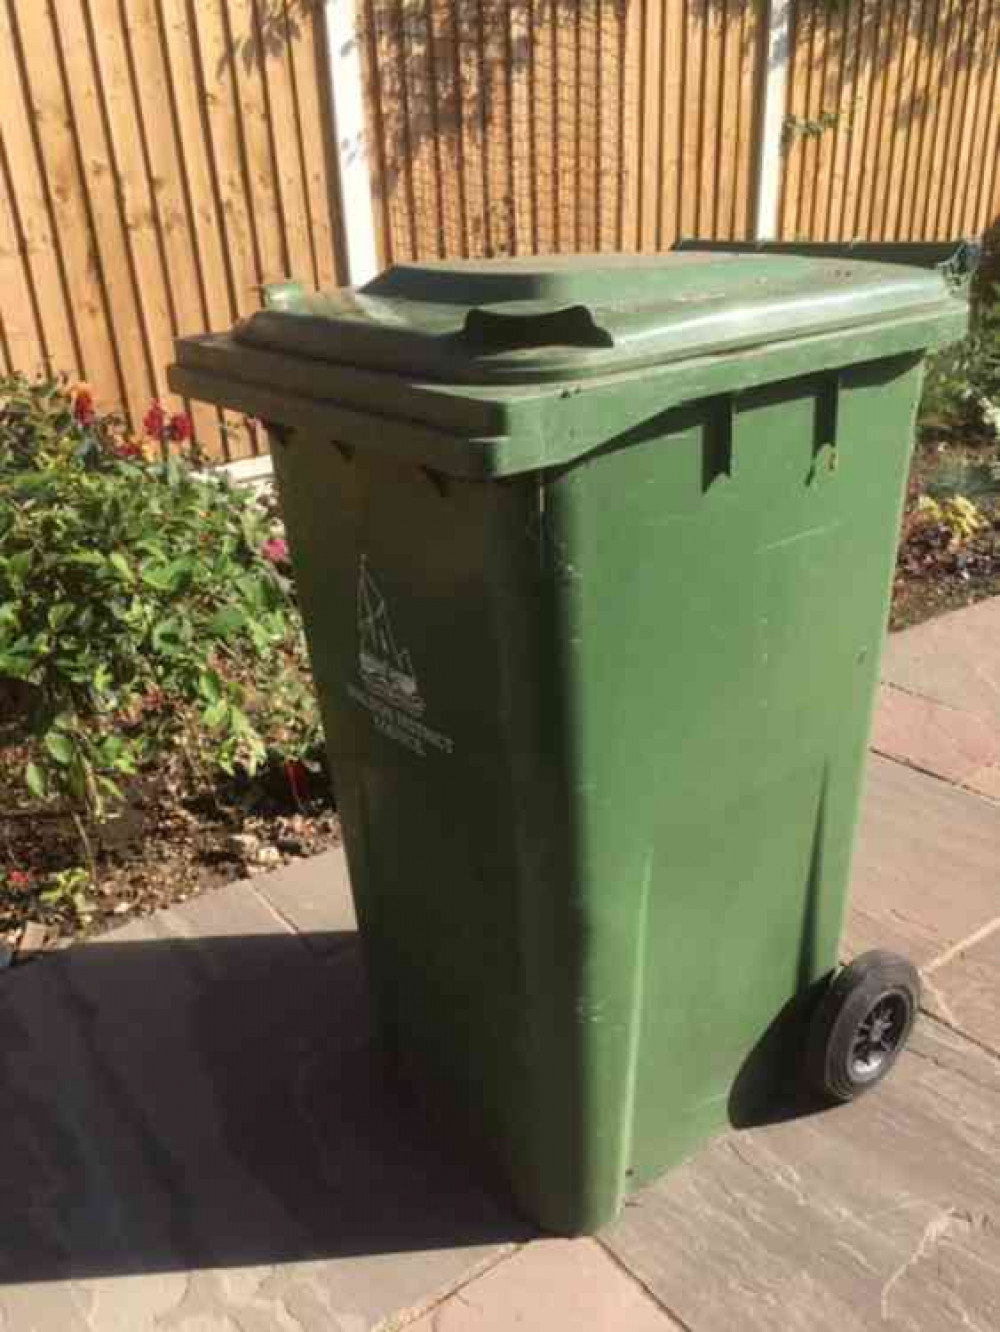 One of Maldon's green garden bins: the scheme is open again for those waiting to sign up